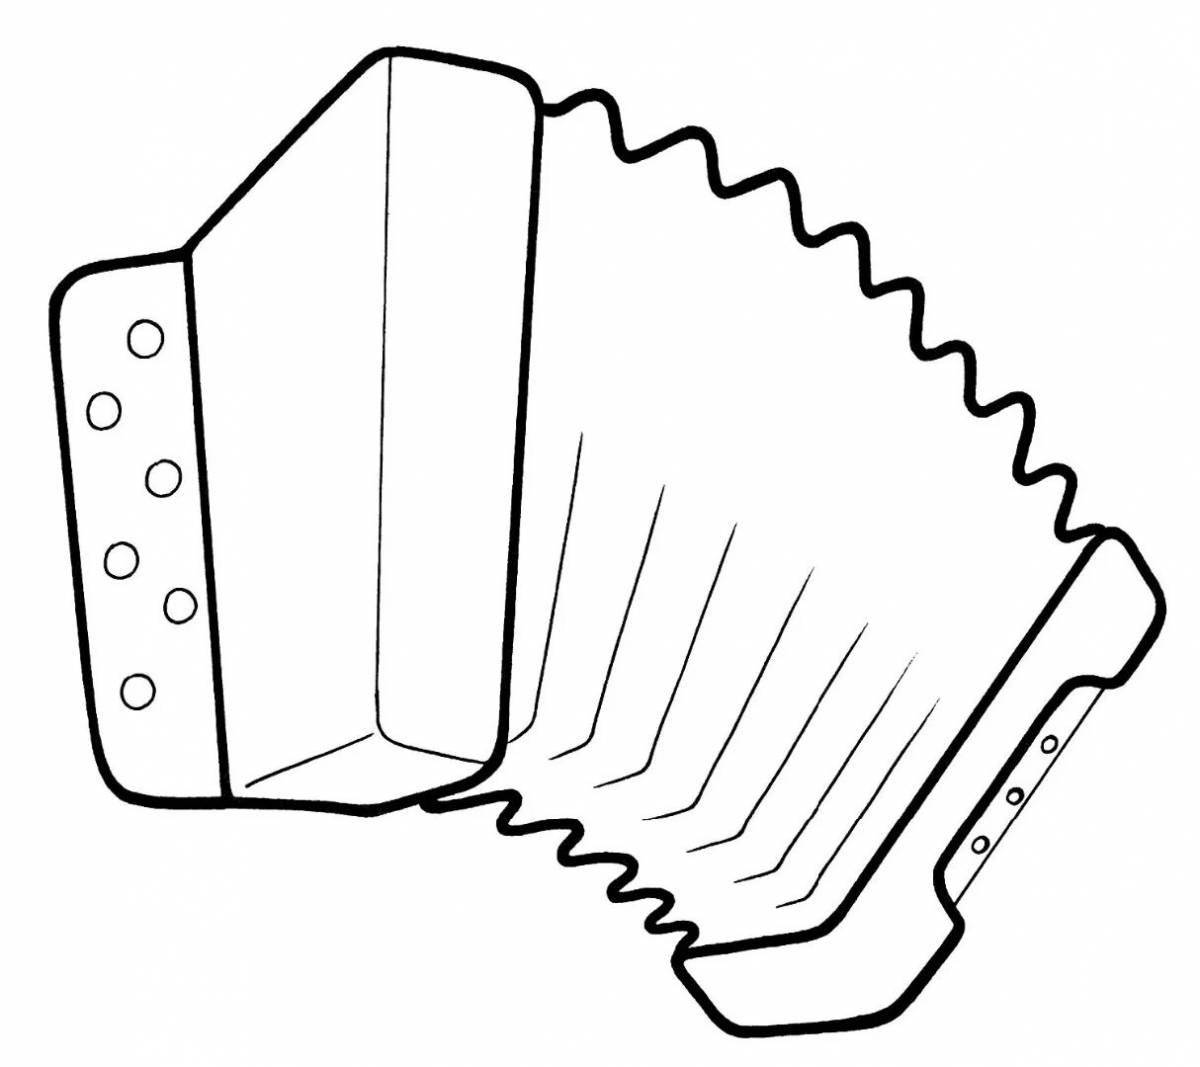 Exciting accordion coloring book for babies